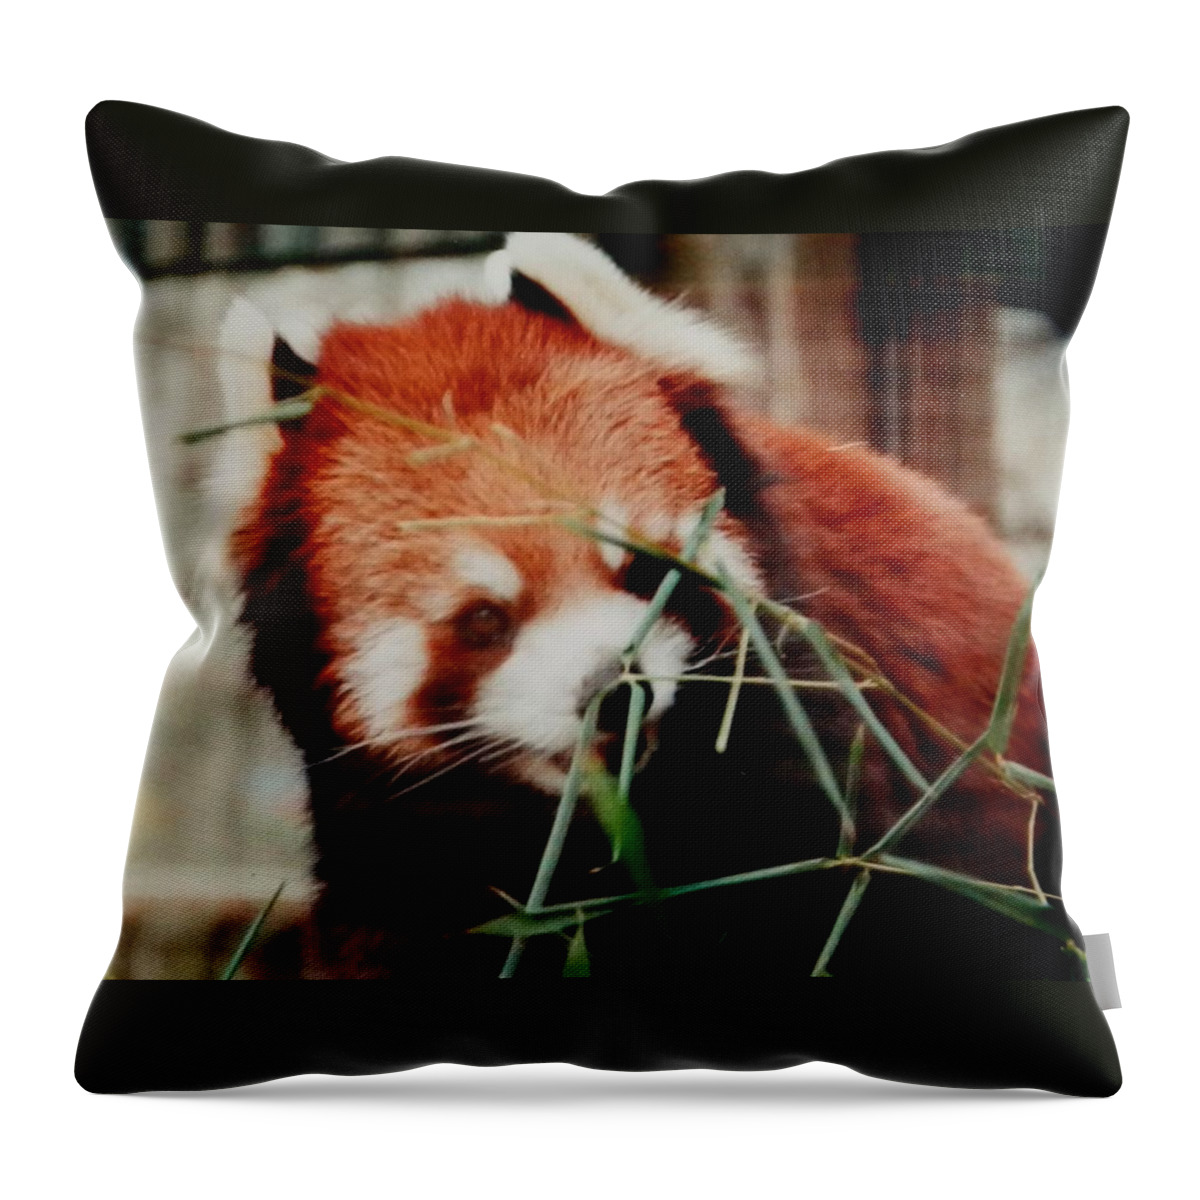 #redpanda #ohiozoo #eatinglunch #baby Throw Pillow featuring the photograph Baby Red Panda Bear by Belinda Lee